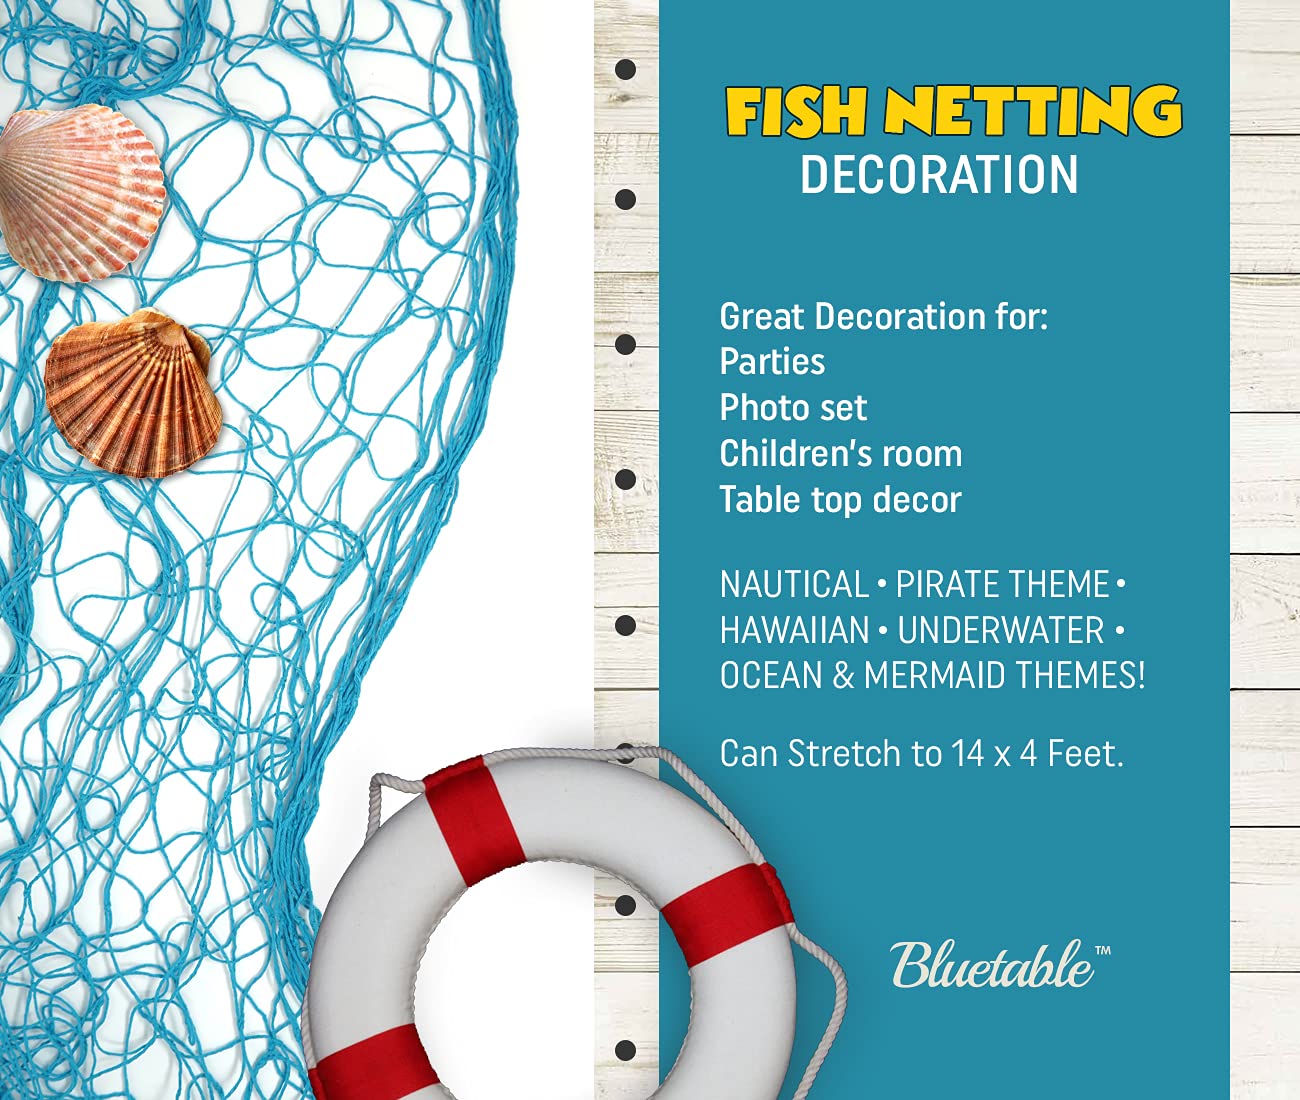 Netting Decoration Fish Net Party Decor – Turquoise Color Cotton Netting 48” x 144” Inches. Teal Blue Fishnet for Nautical Theme, Pirate Party, Hawaiian Party, Underwater, Beach Ocean & Mermaid Party